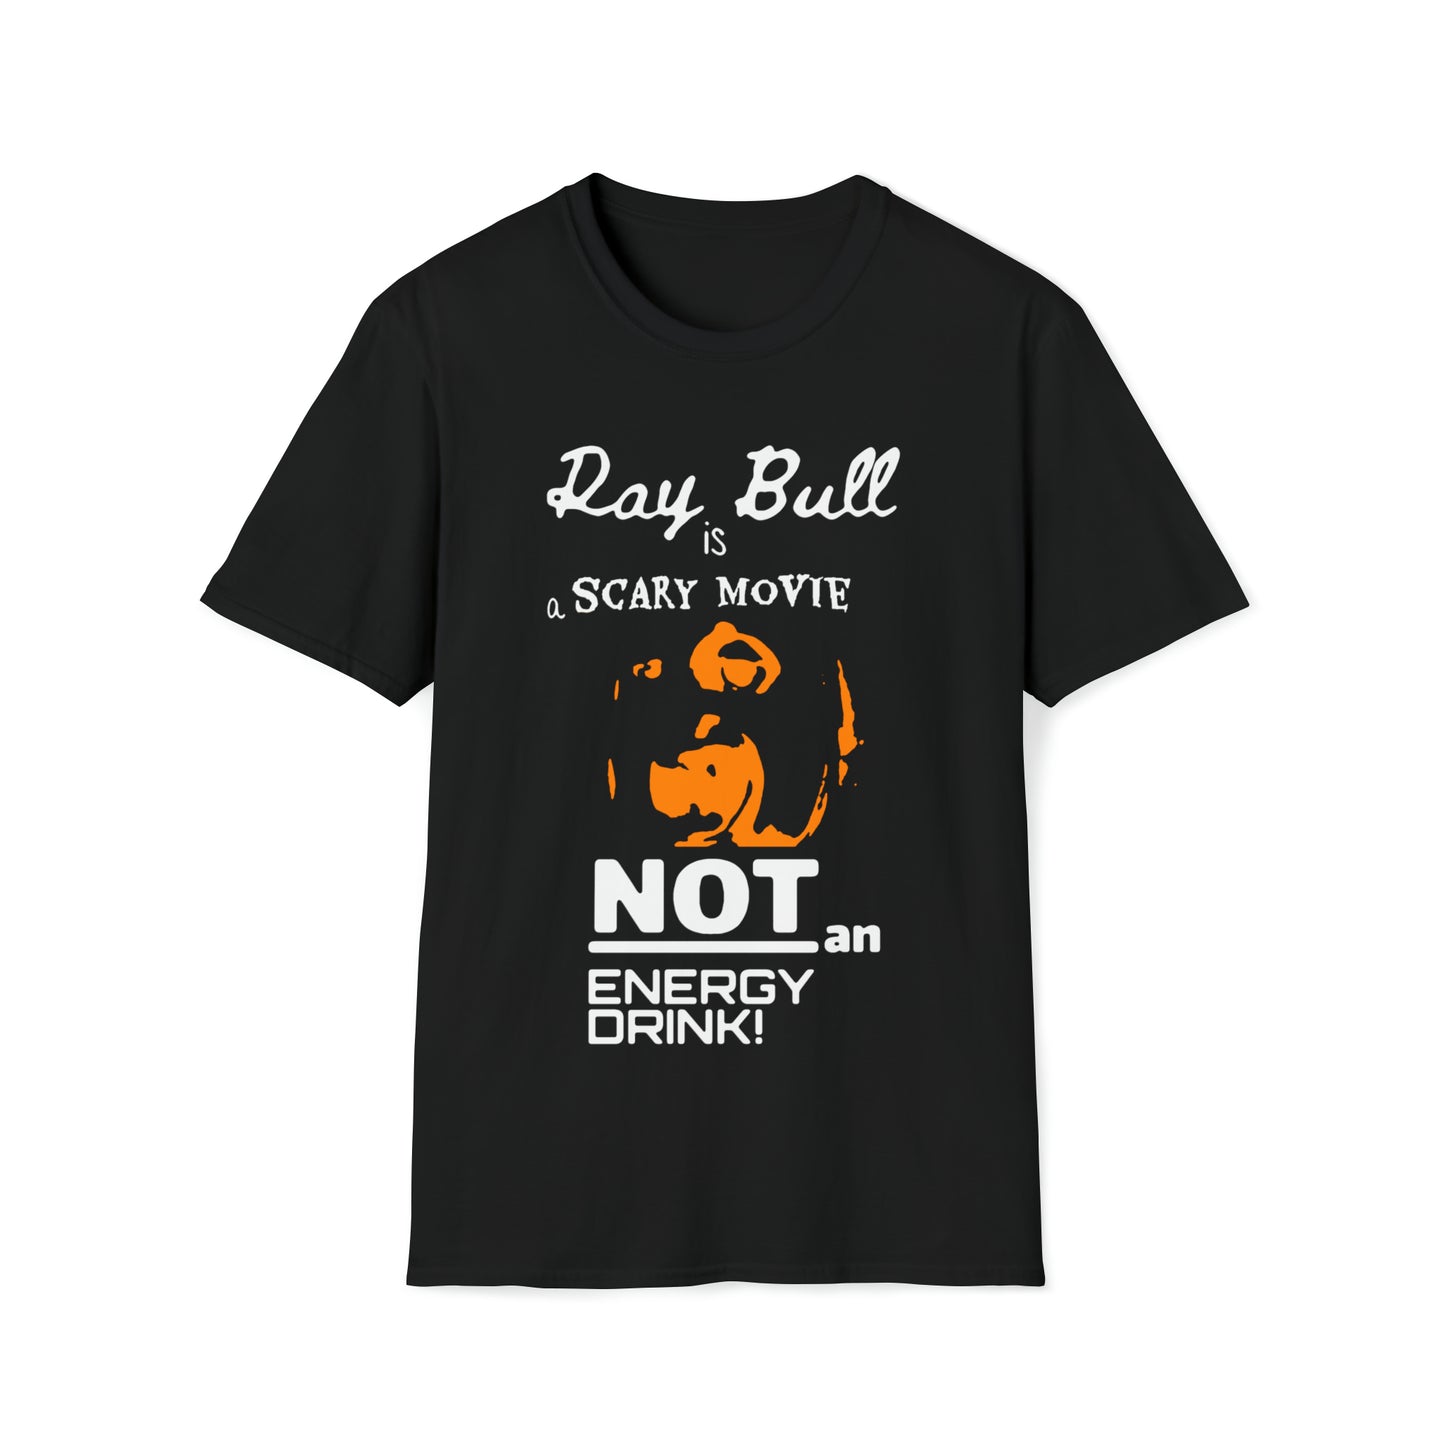 'Ray Bull is a SCARY MOVIE NOT an ENERGY DRINK' TEE